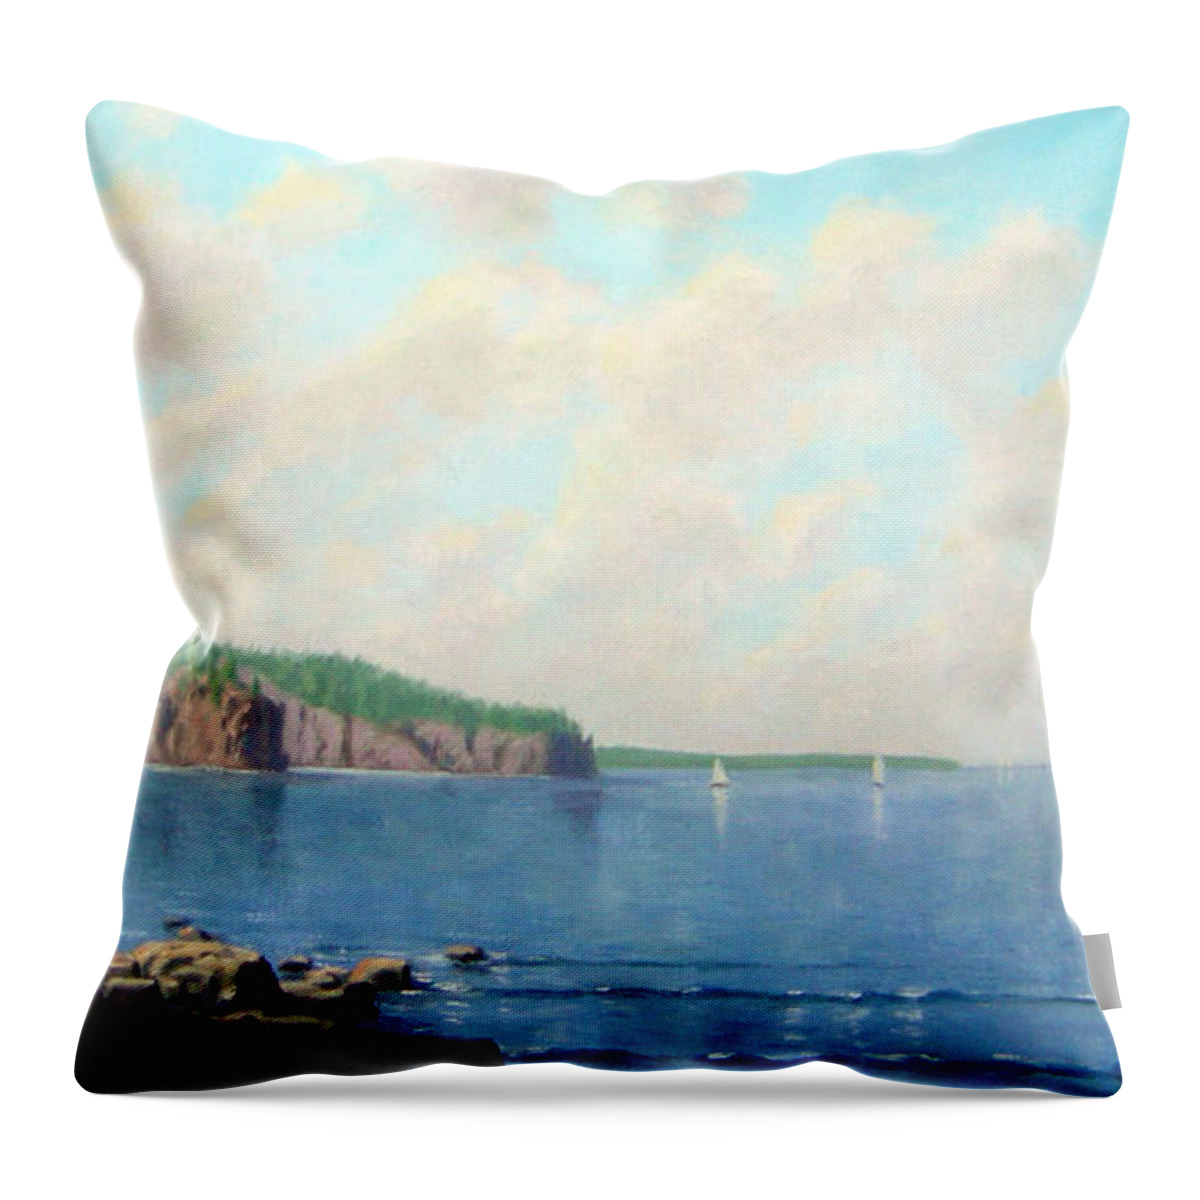 Landscape Throw Pillow featuring the painting Superior View by Rick Hansen